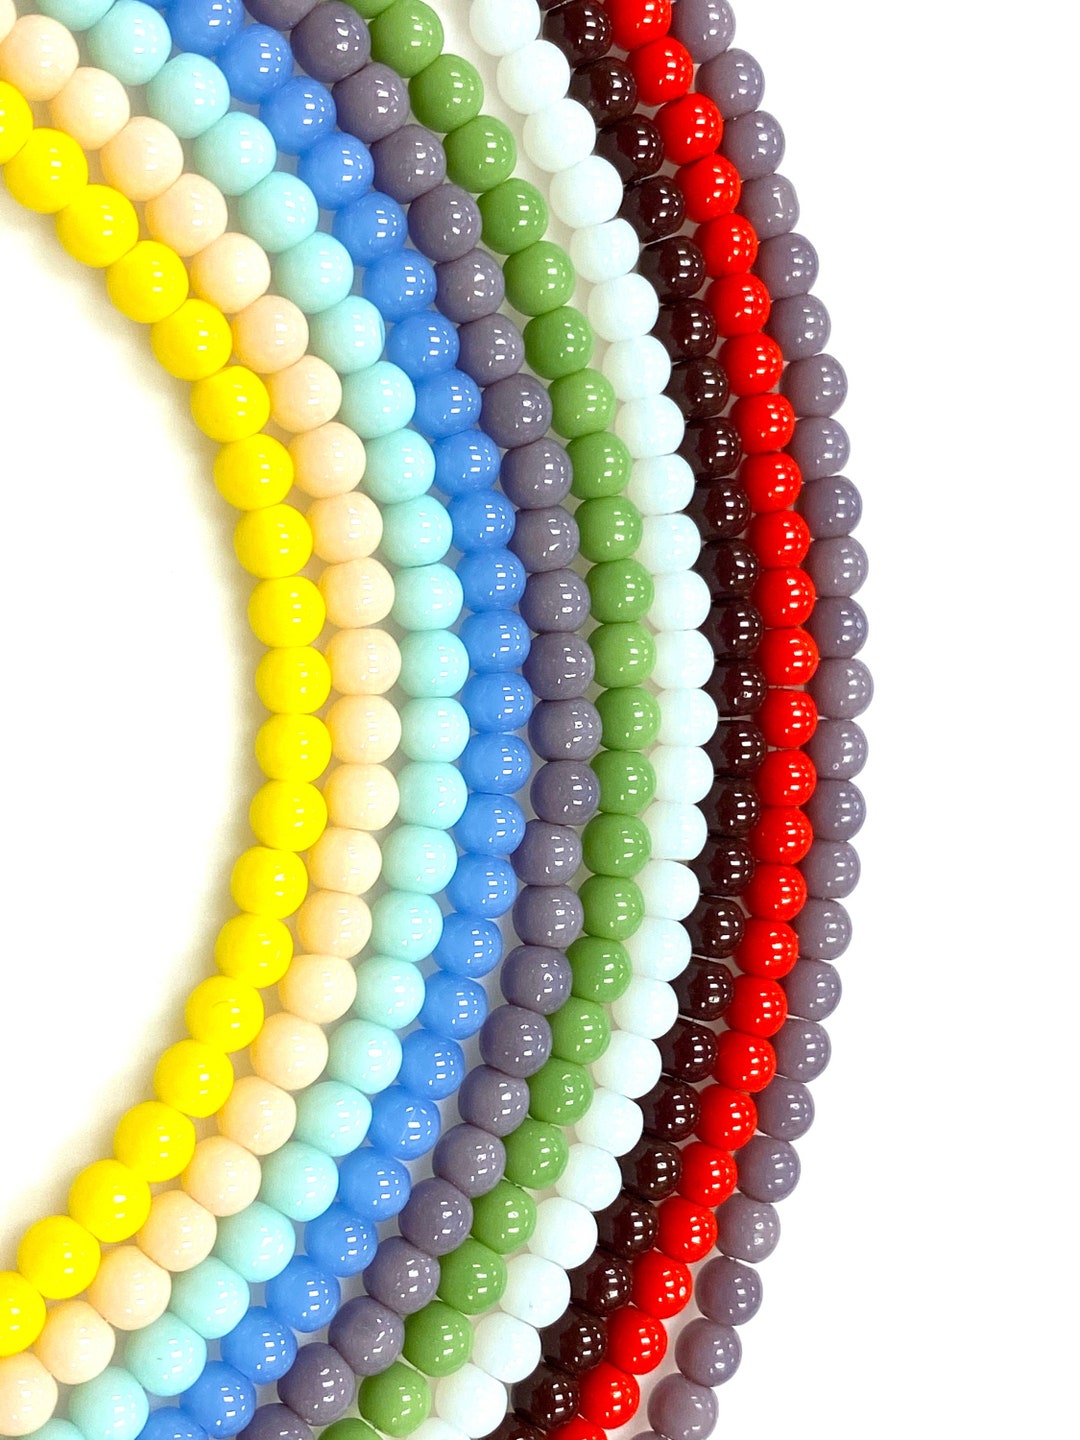 Bulk 10 Strands Lot of Czech Opaque Glass Beads Round 4mm Loose Beads,  Solid Color Smooth Crystal Glass Beads for DIY Jewelry Making 